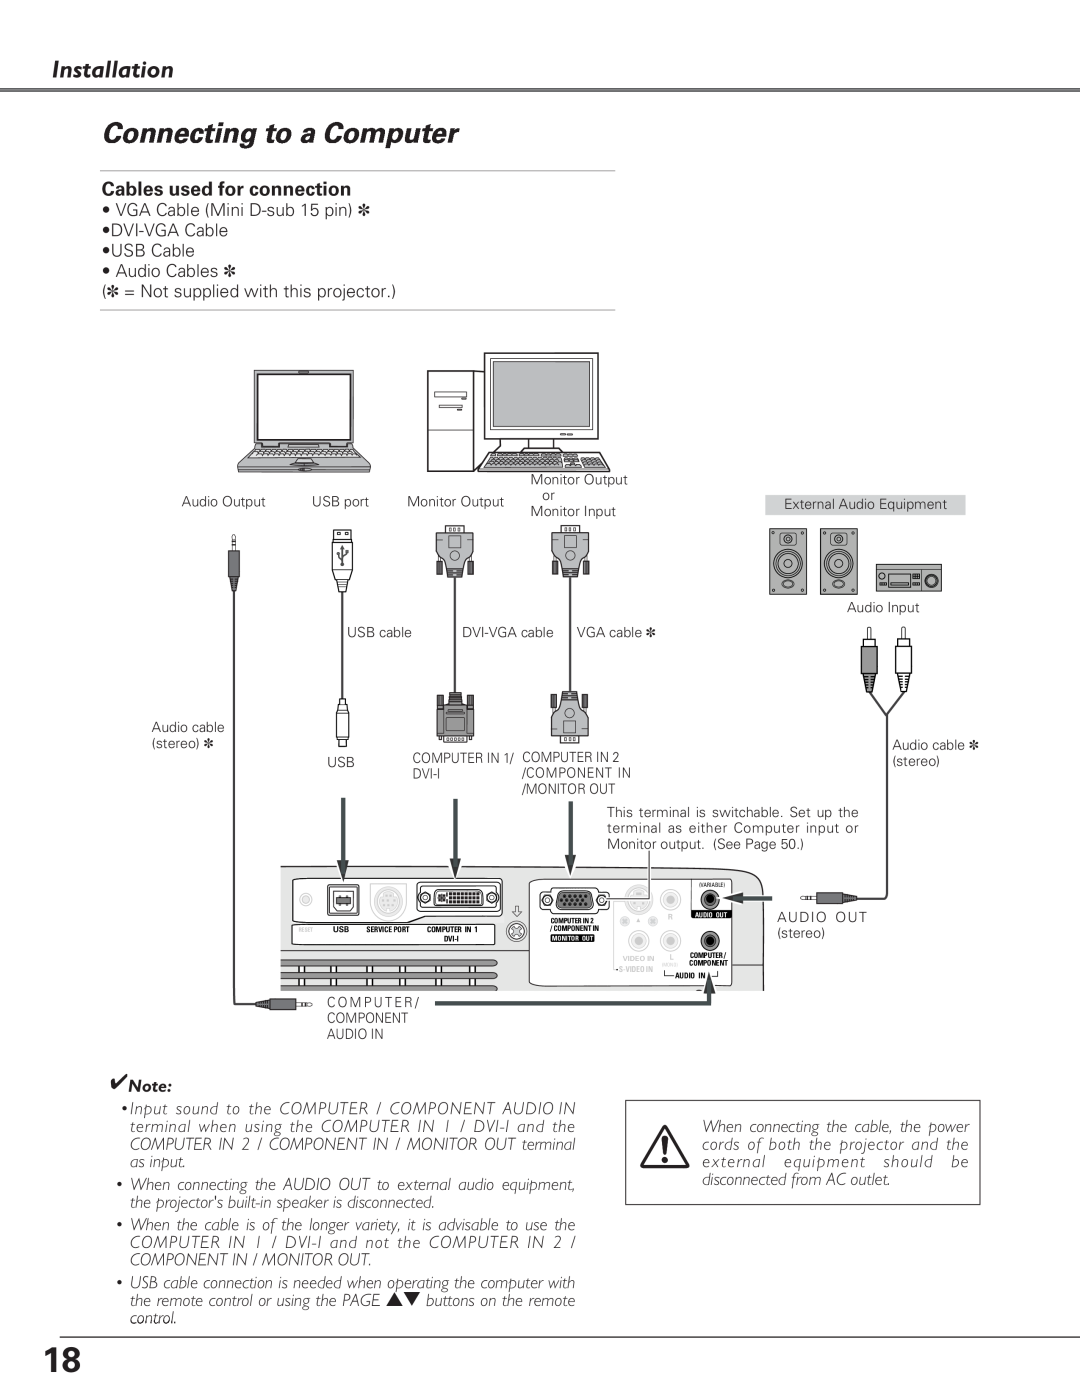 Eiki LC-XB27 owner manual Connecting to a Computer, Installation, Cables used for connection 